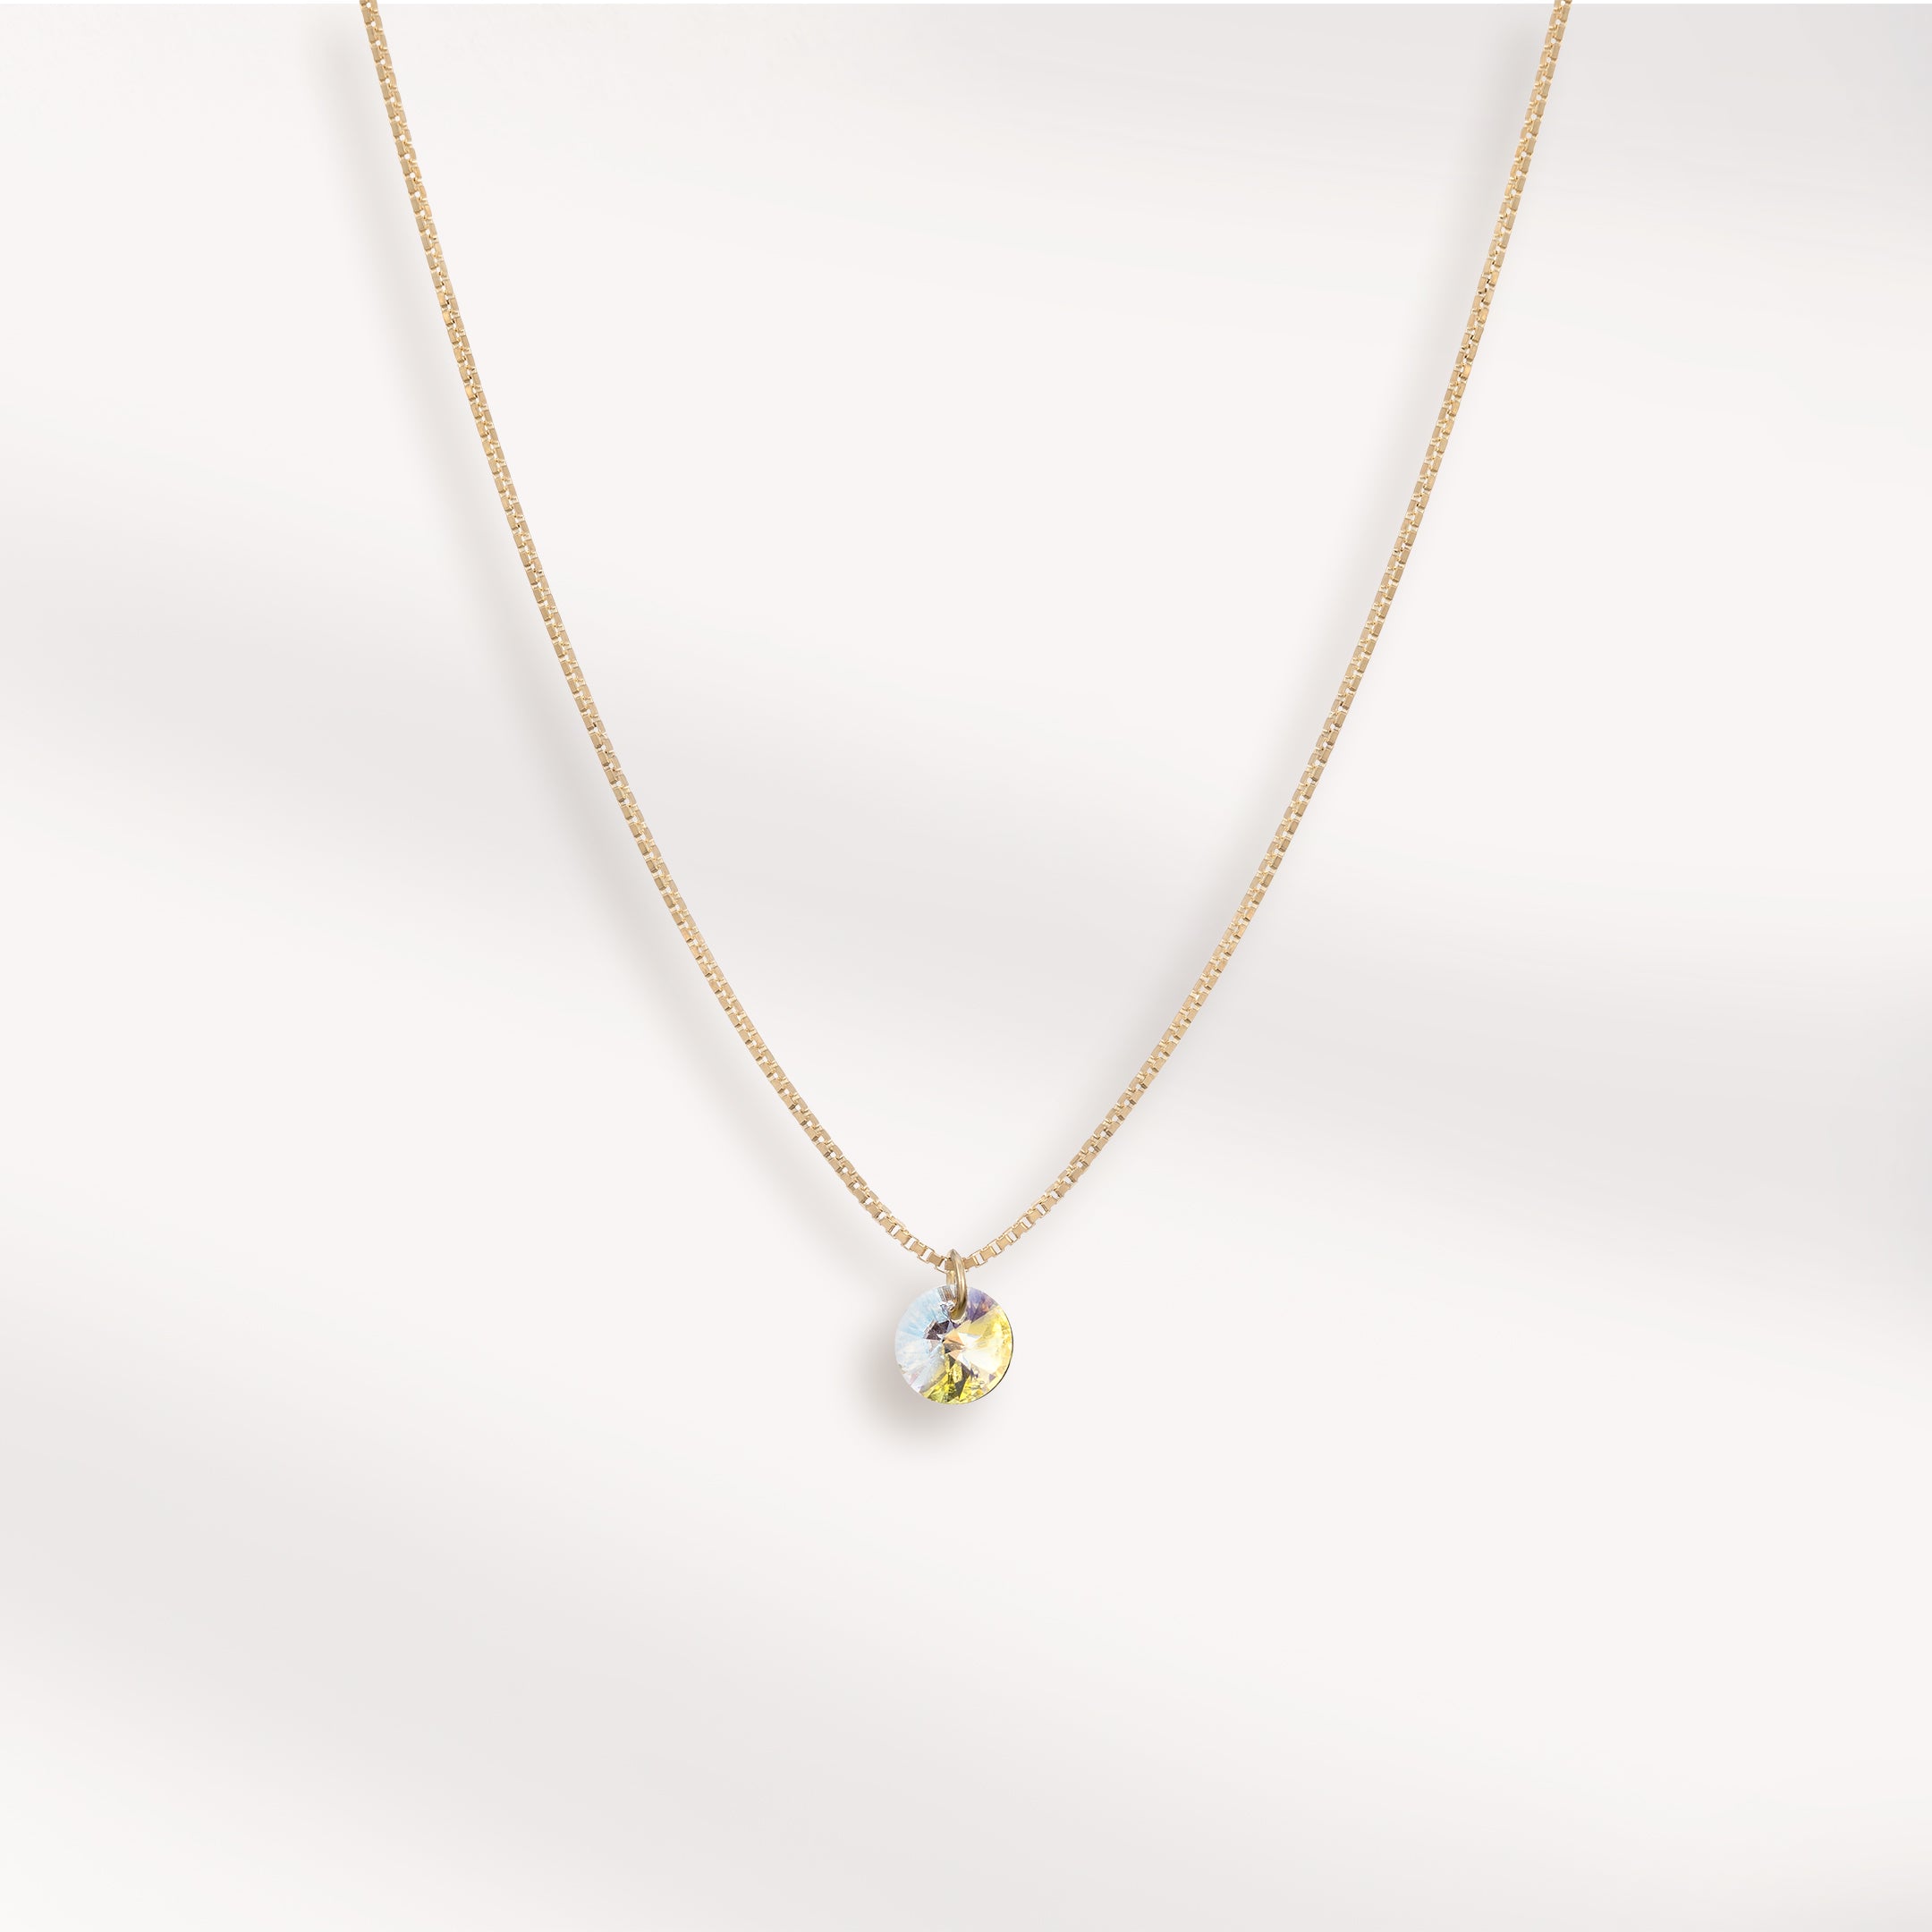 Chain Necklace, 18k Gold Plated Necklace, 18k Pure Gold Necklace, Silver 925 Necklace, Long Necklace, Handmade, Rainbow Stone, Fine Jewellery, Simple Necklace, Preciuous  